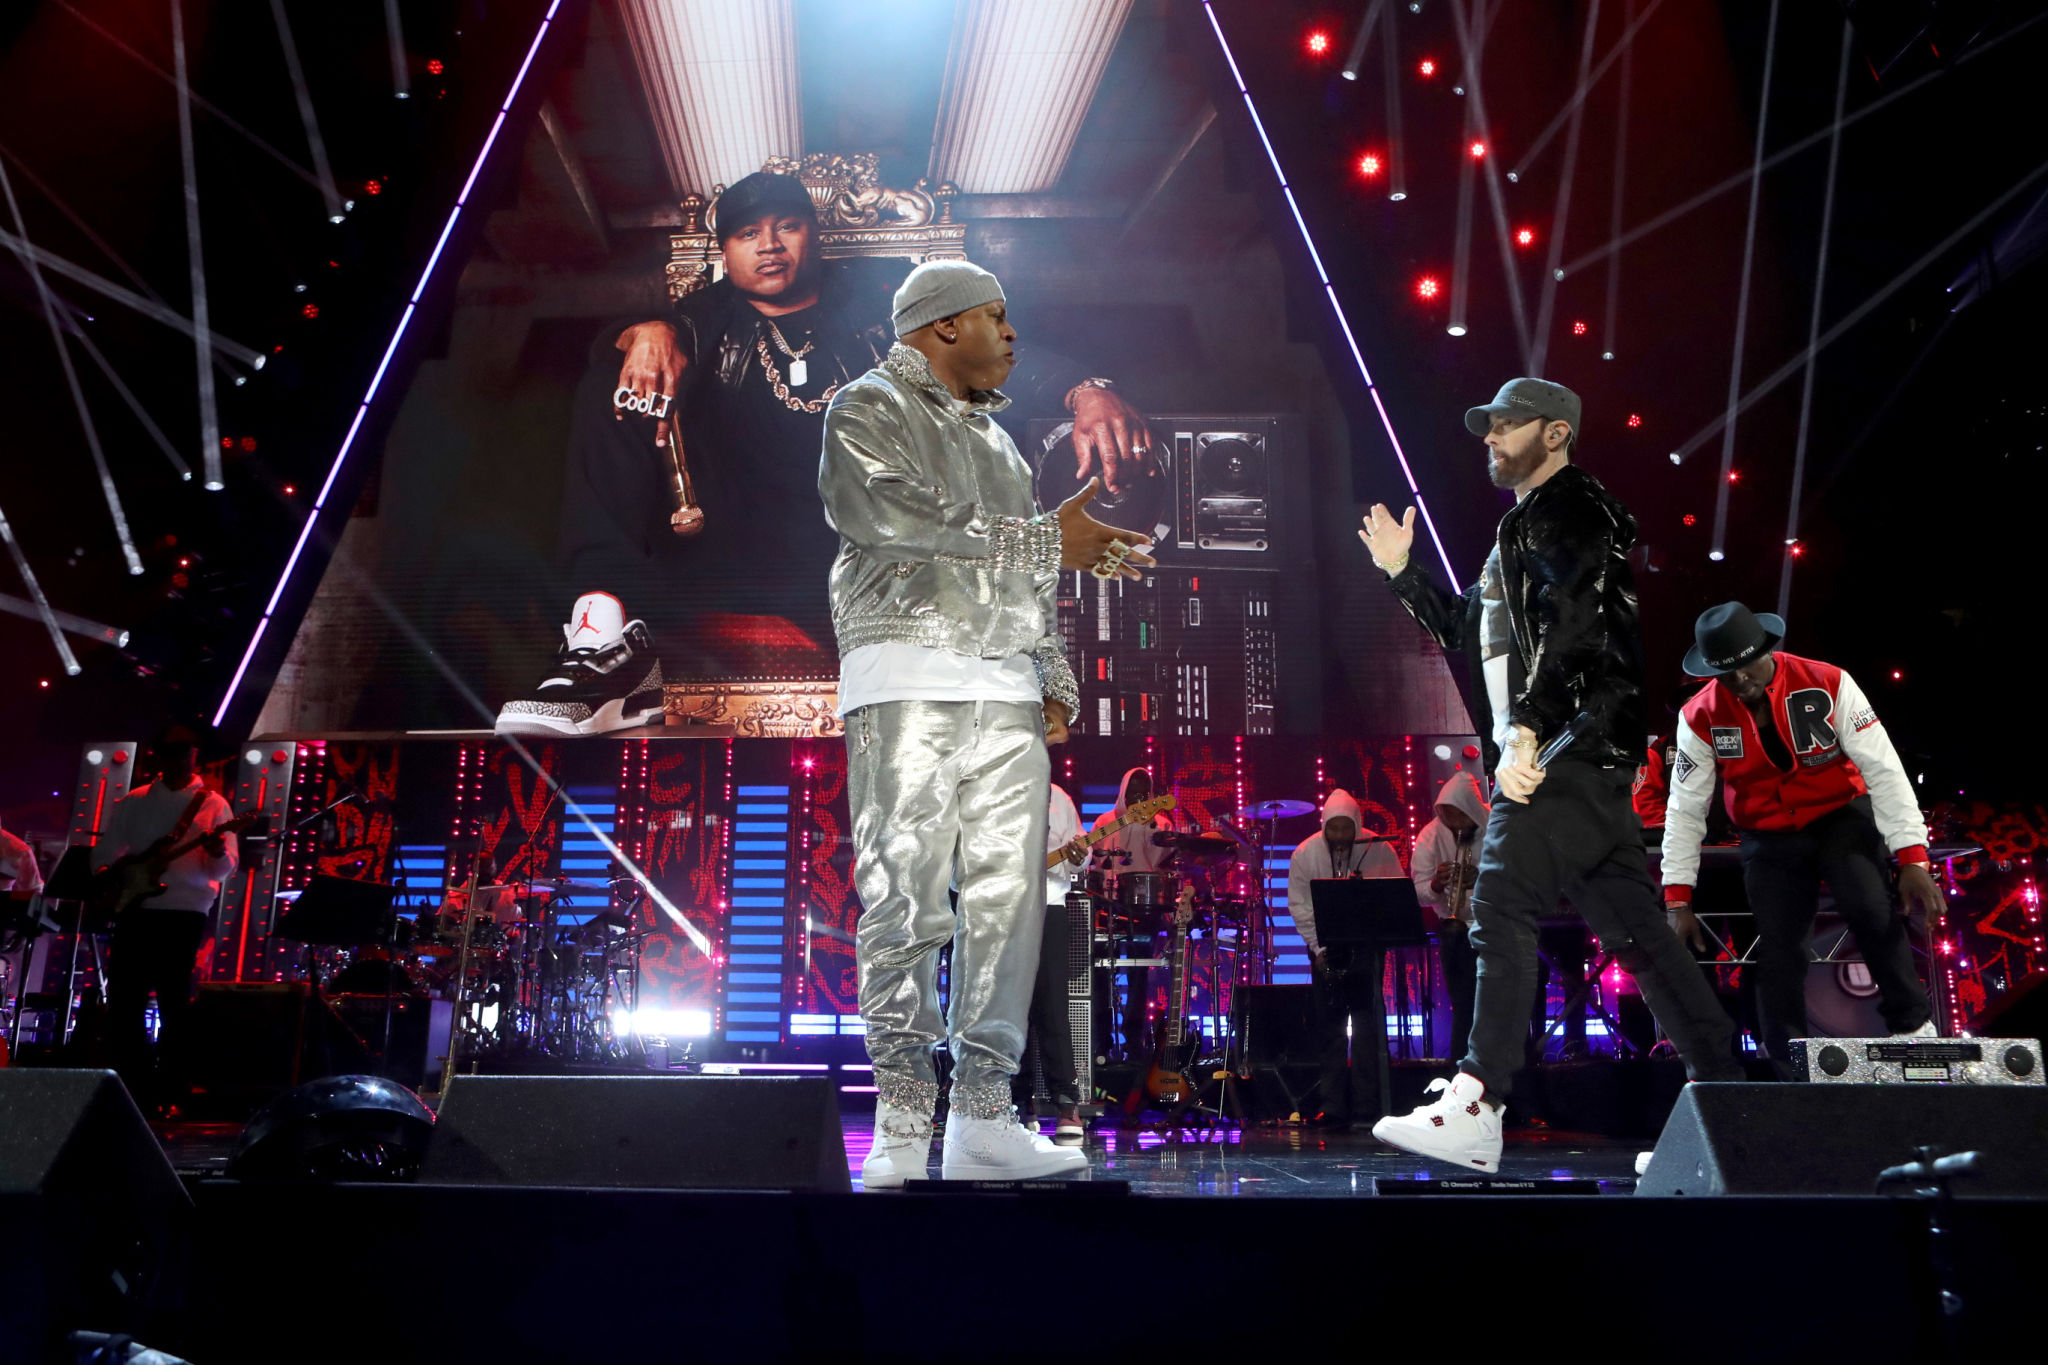 CLEVELAND, OHIO - OCTOBER 30: LL Cool J and Eminem perform onstage during the 36th Annual Rock & Roll Hall Of Fame Induction Ceremony at Rocket Mortgage Fieldhouse on October 30, 2021 in Cleveland, Ohio. (Photo by Kevin Kane/Getty Images for The Rock and Roll Hall of Fame )